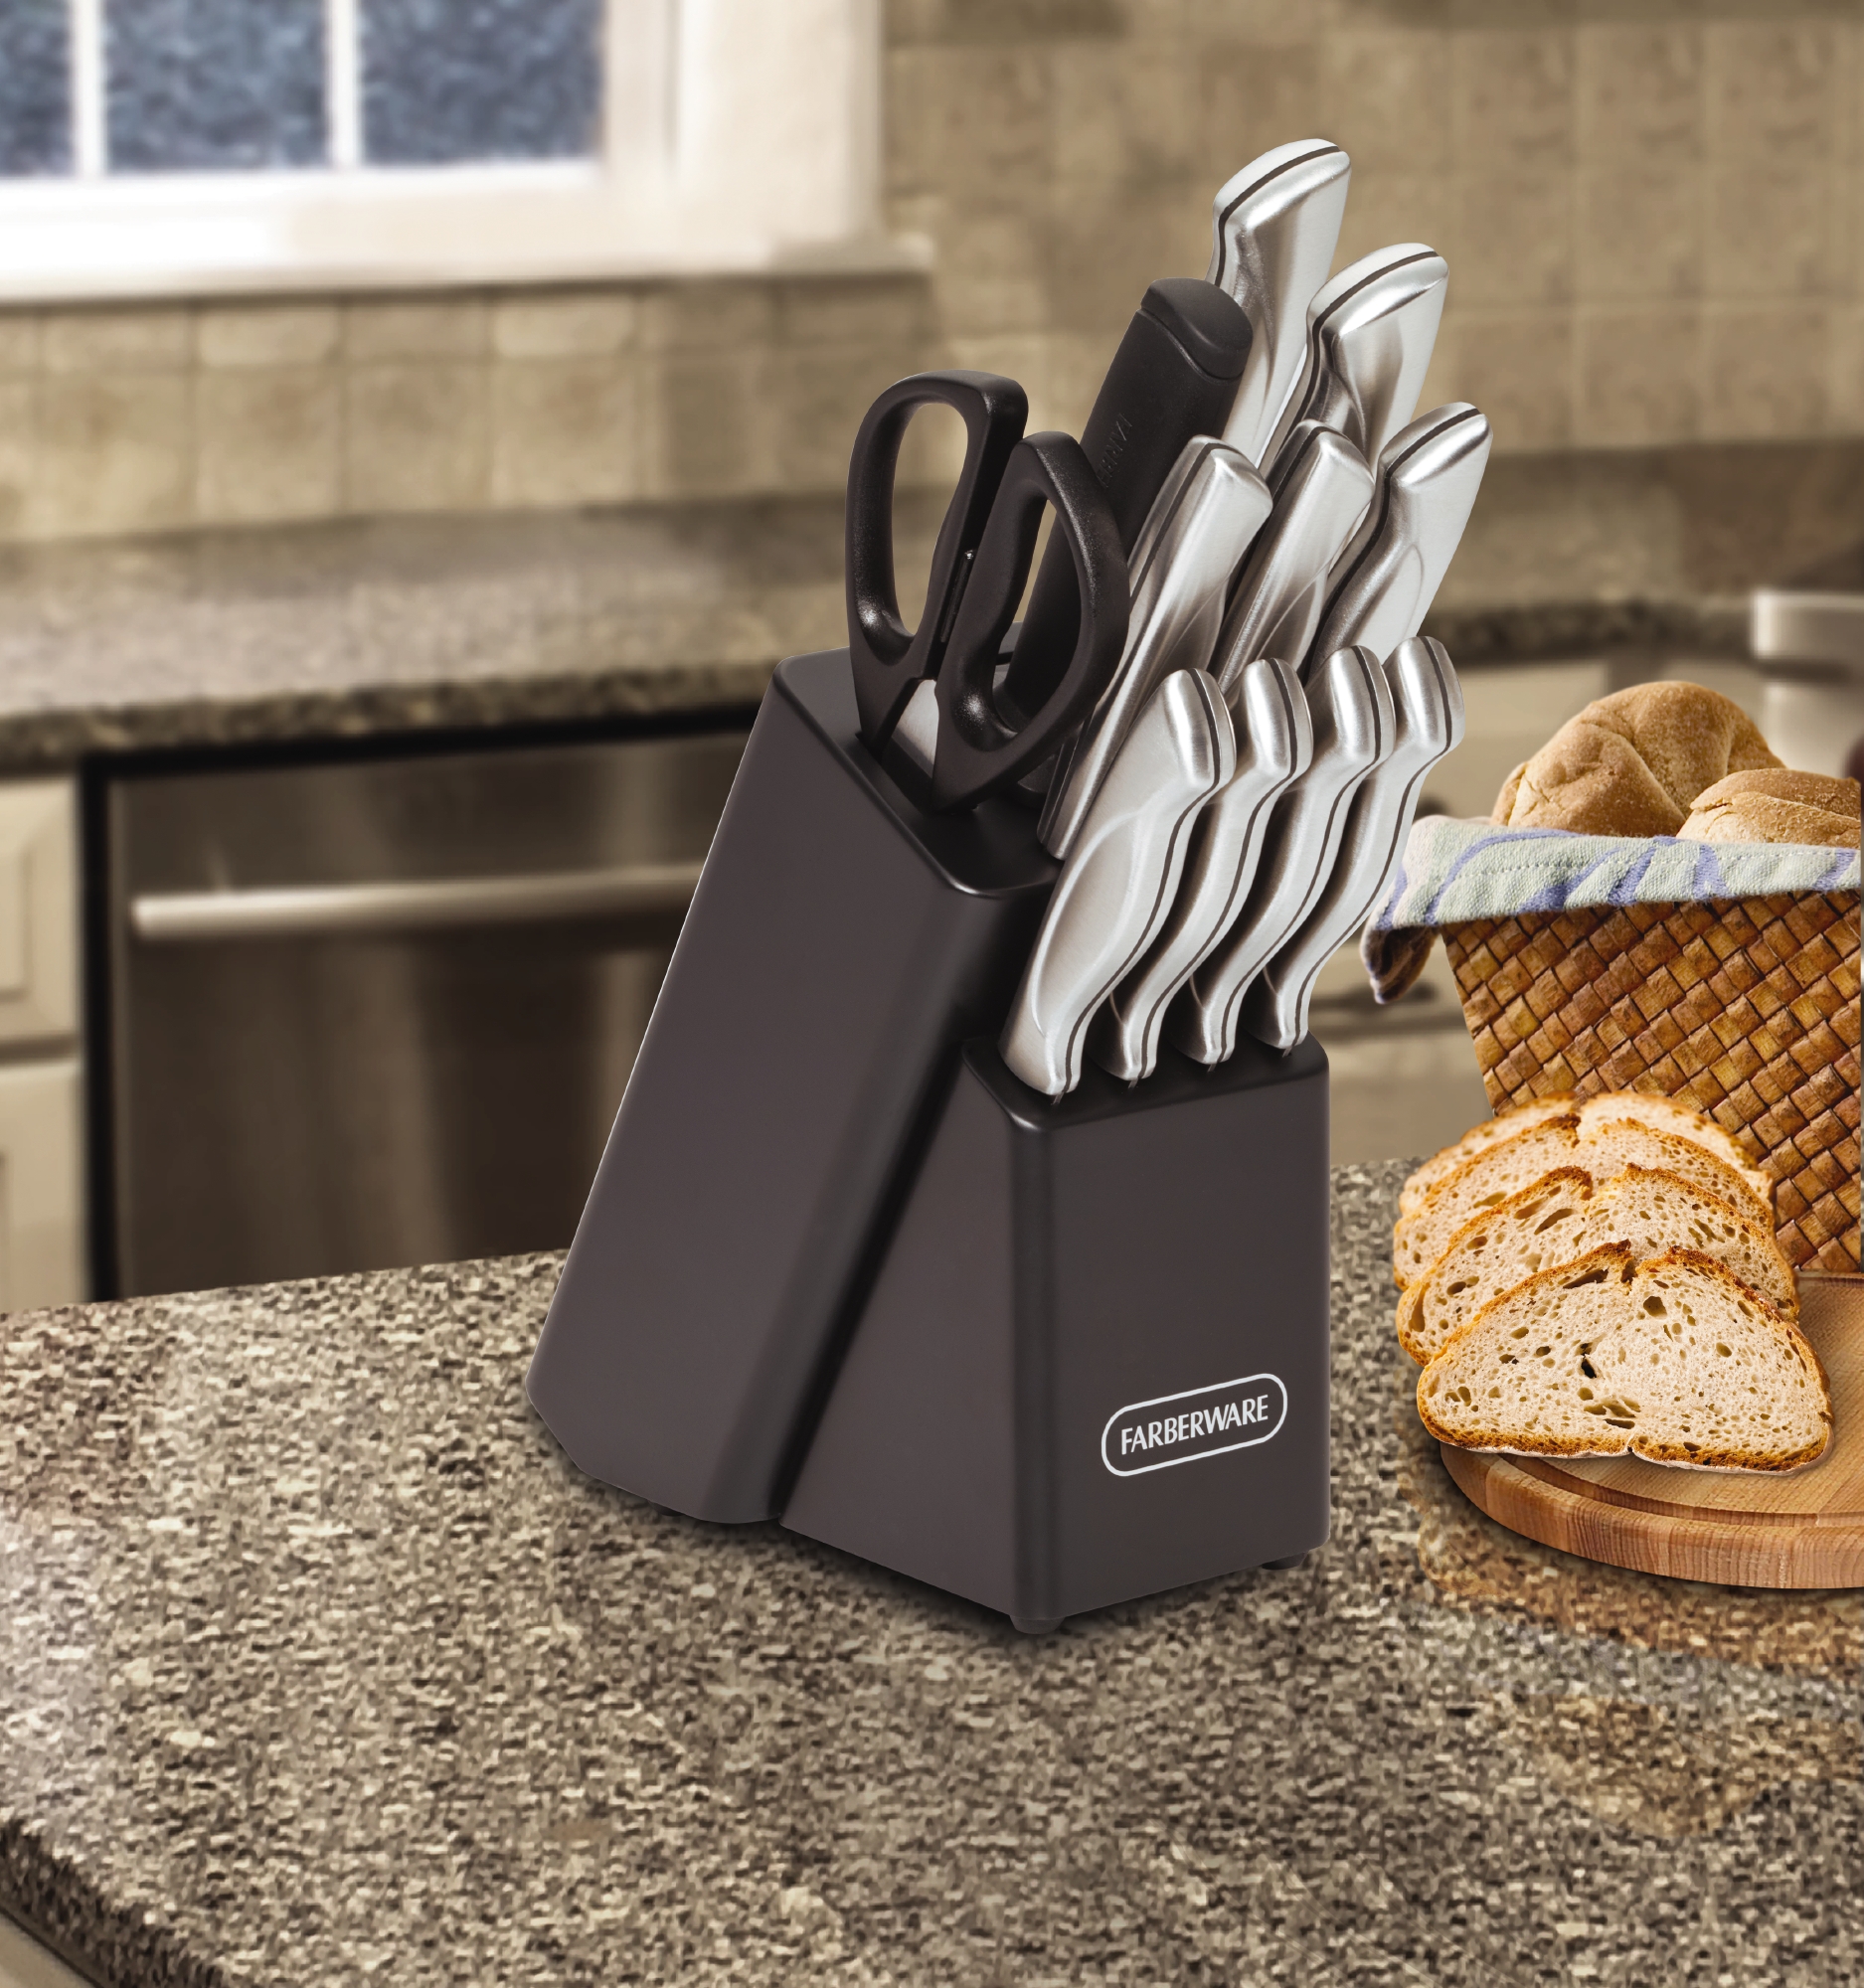 Farberware Classic 22 Piece Stamped Stainless Steel Knife Set and Utensil Set - image 3 of 27